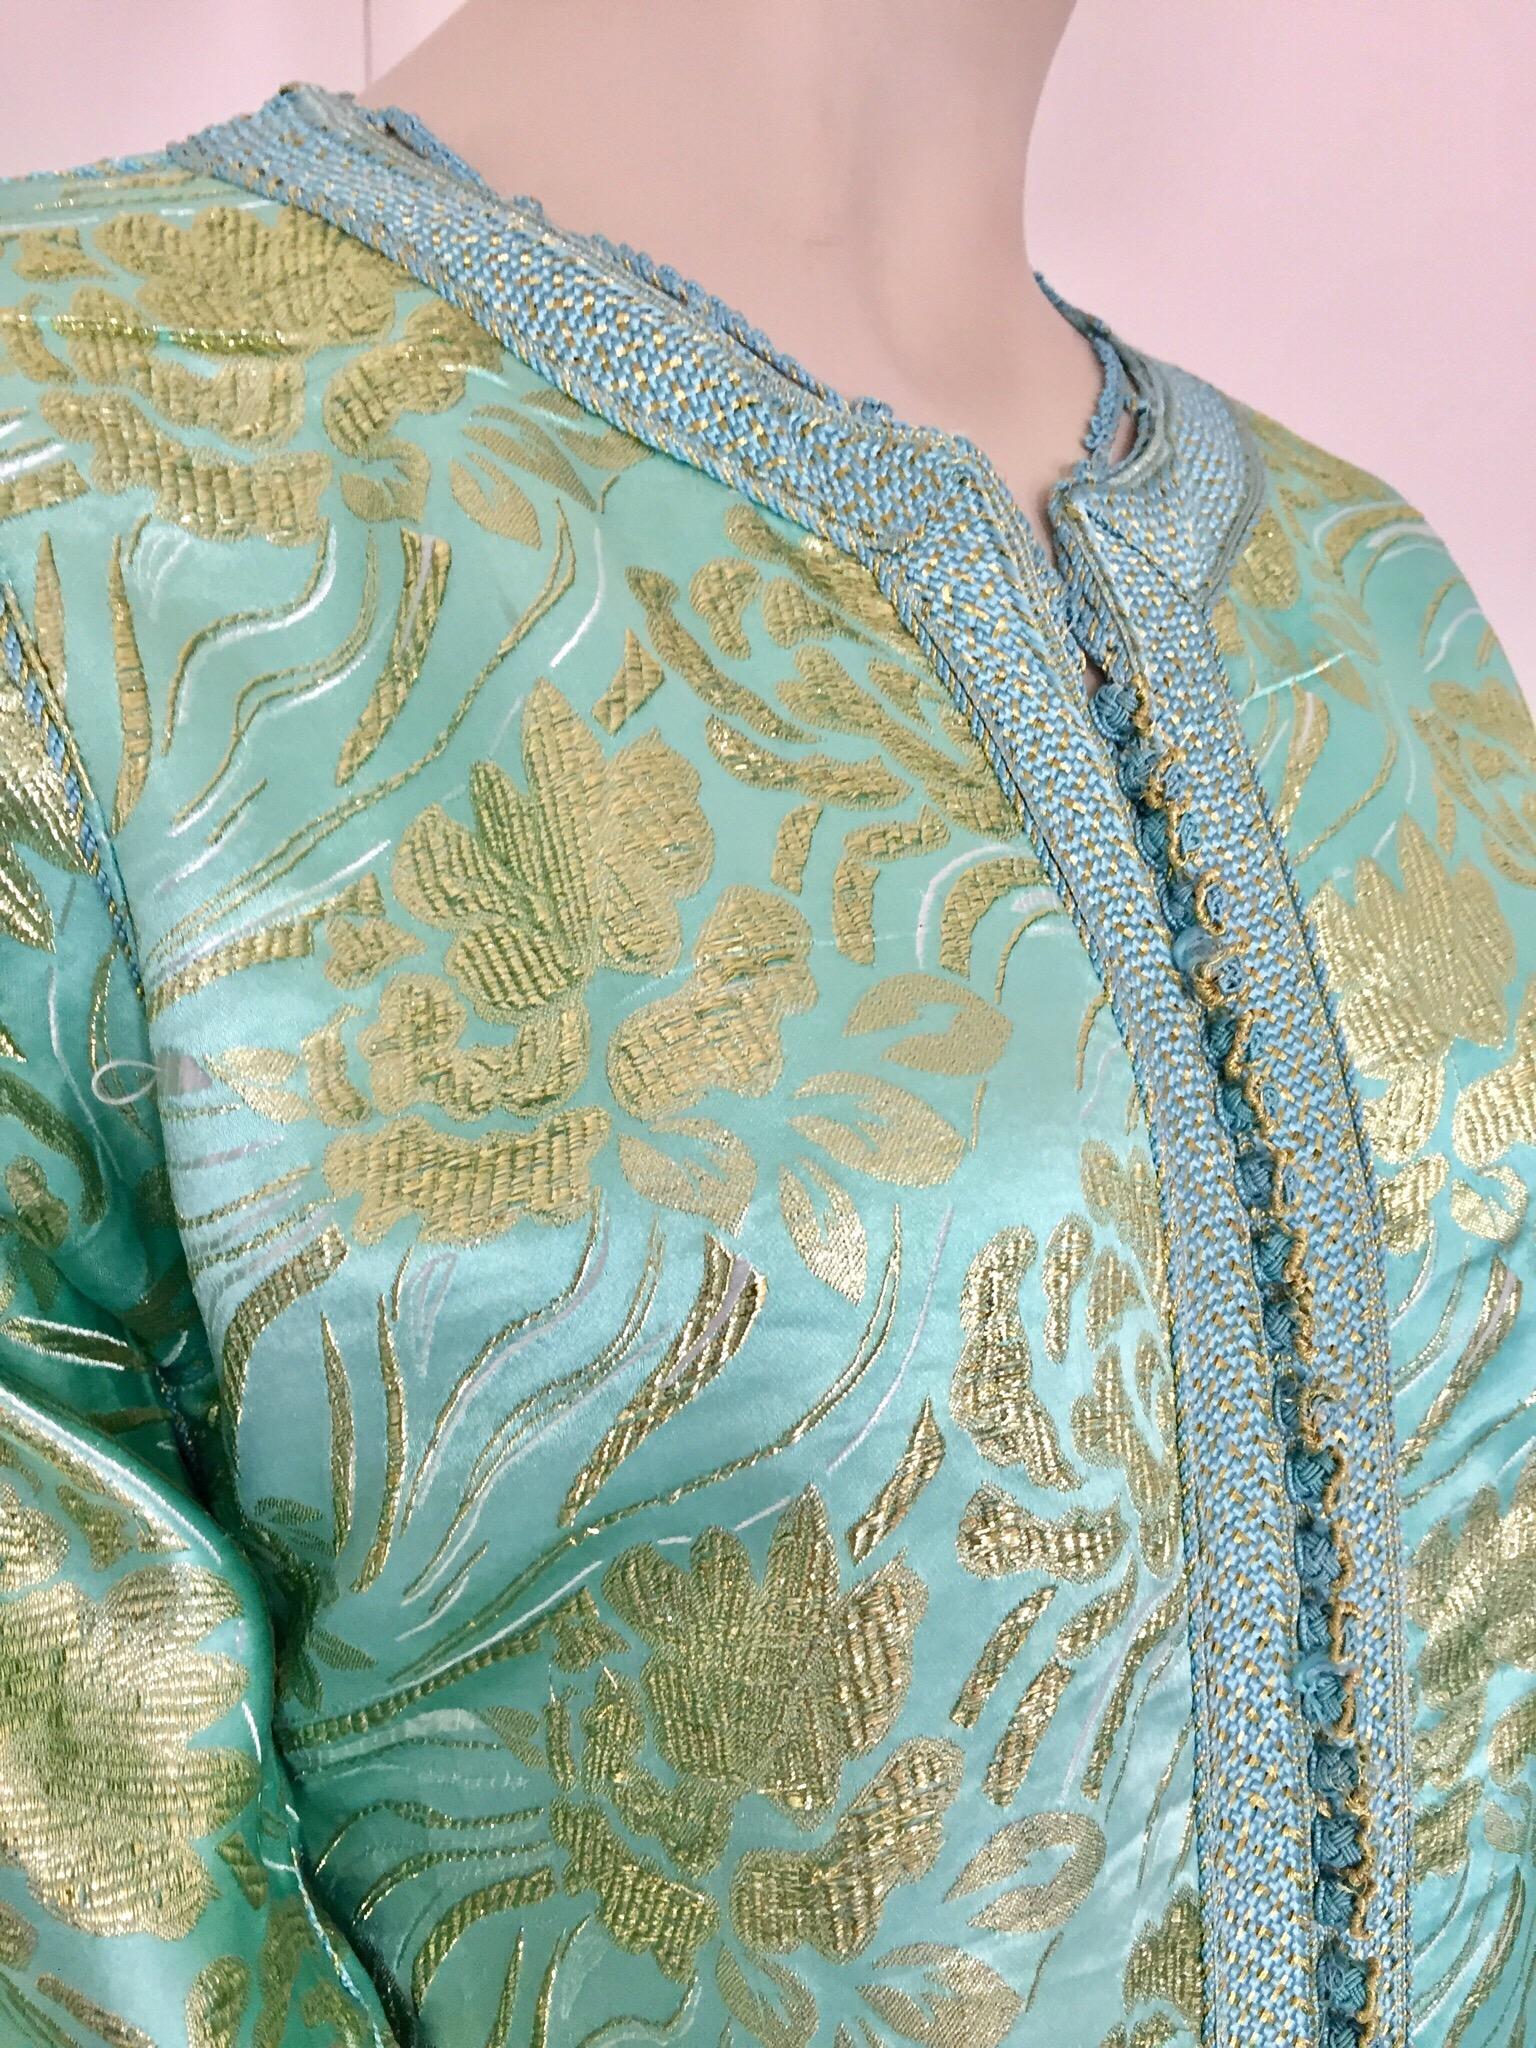 Moroccan Vintage Kaftan in Turquoise and Gold Floral Brocade Metallic Lame - 1 For Sale 2